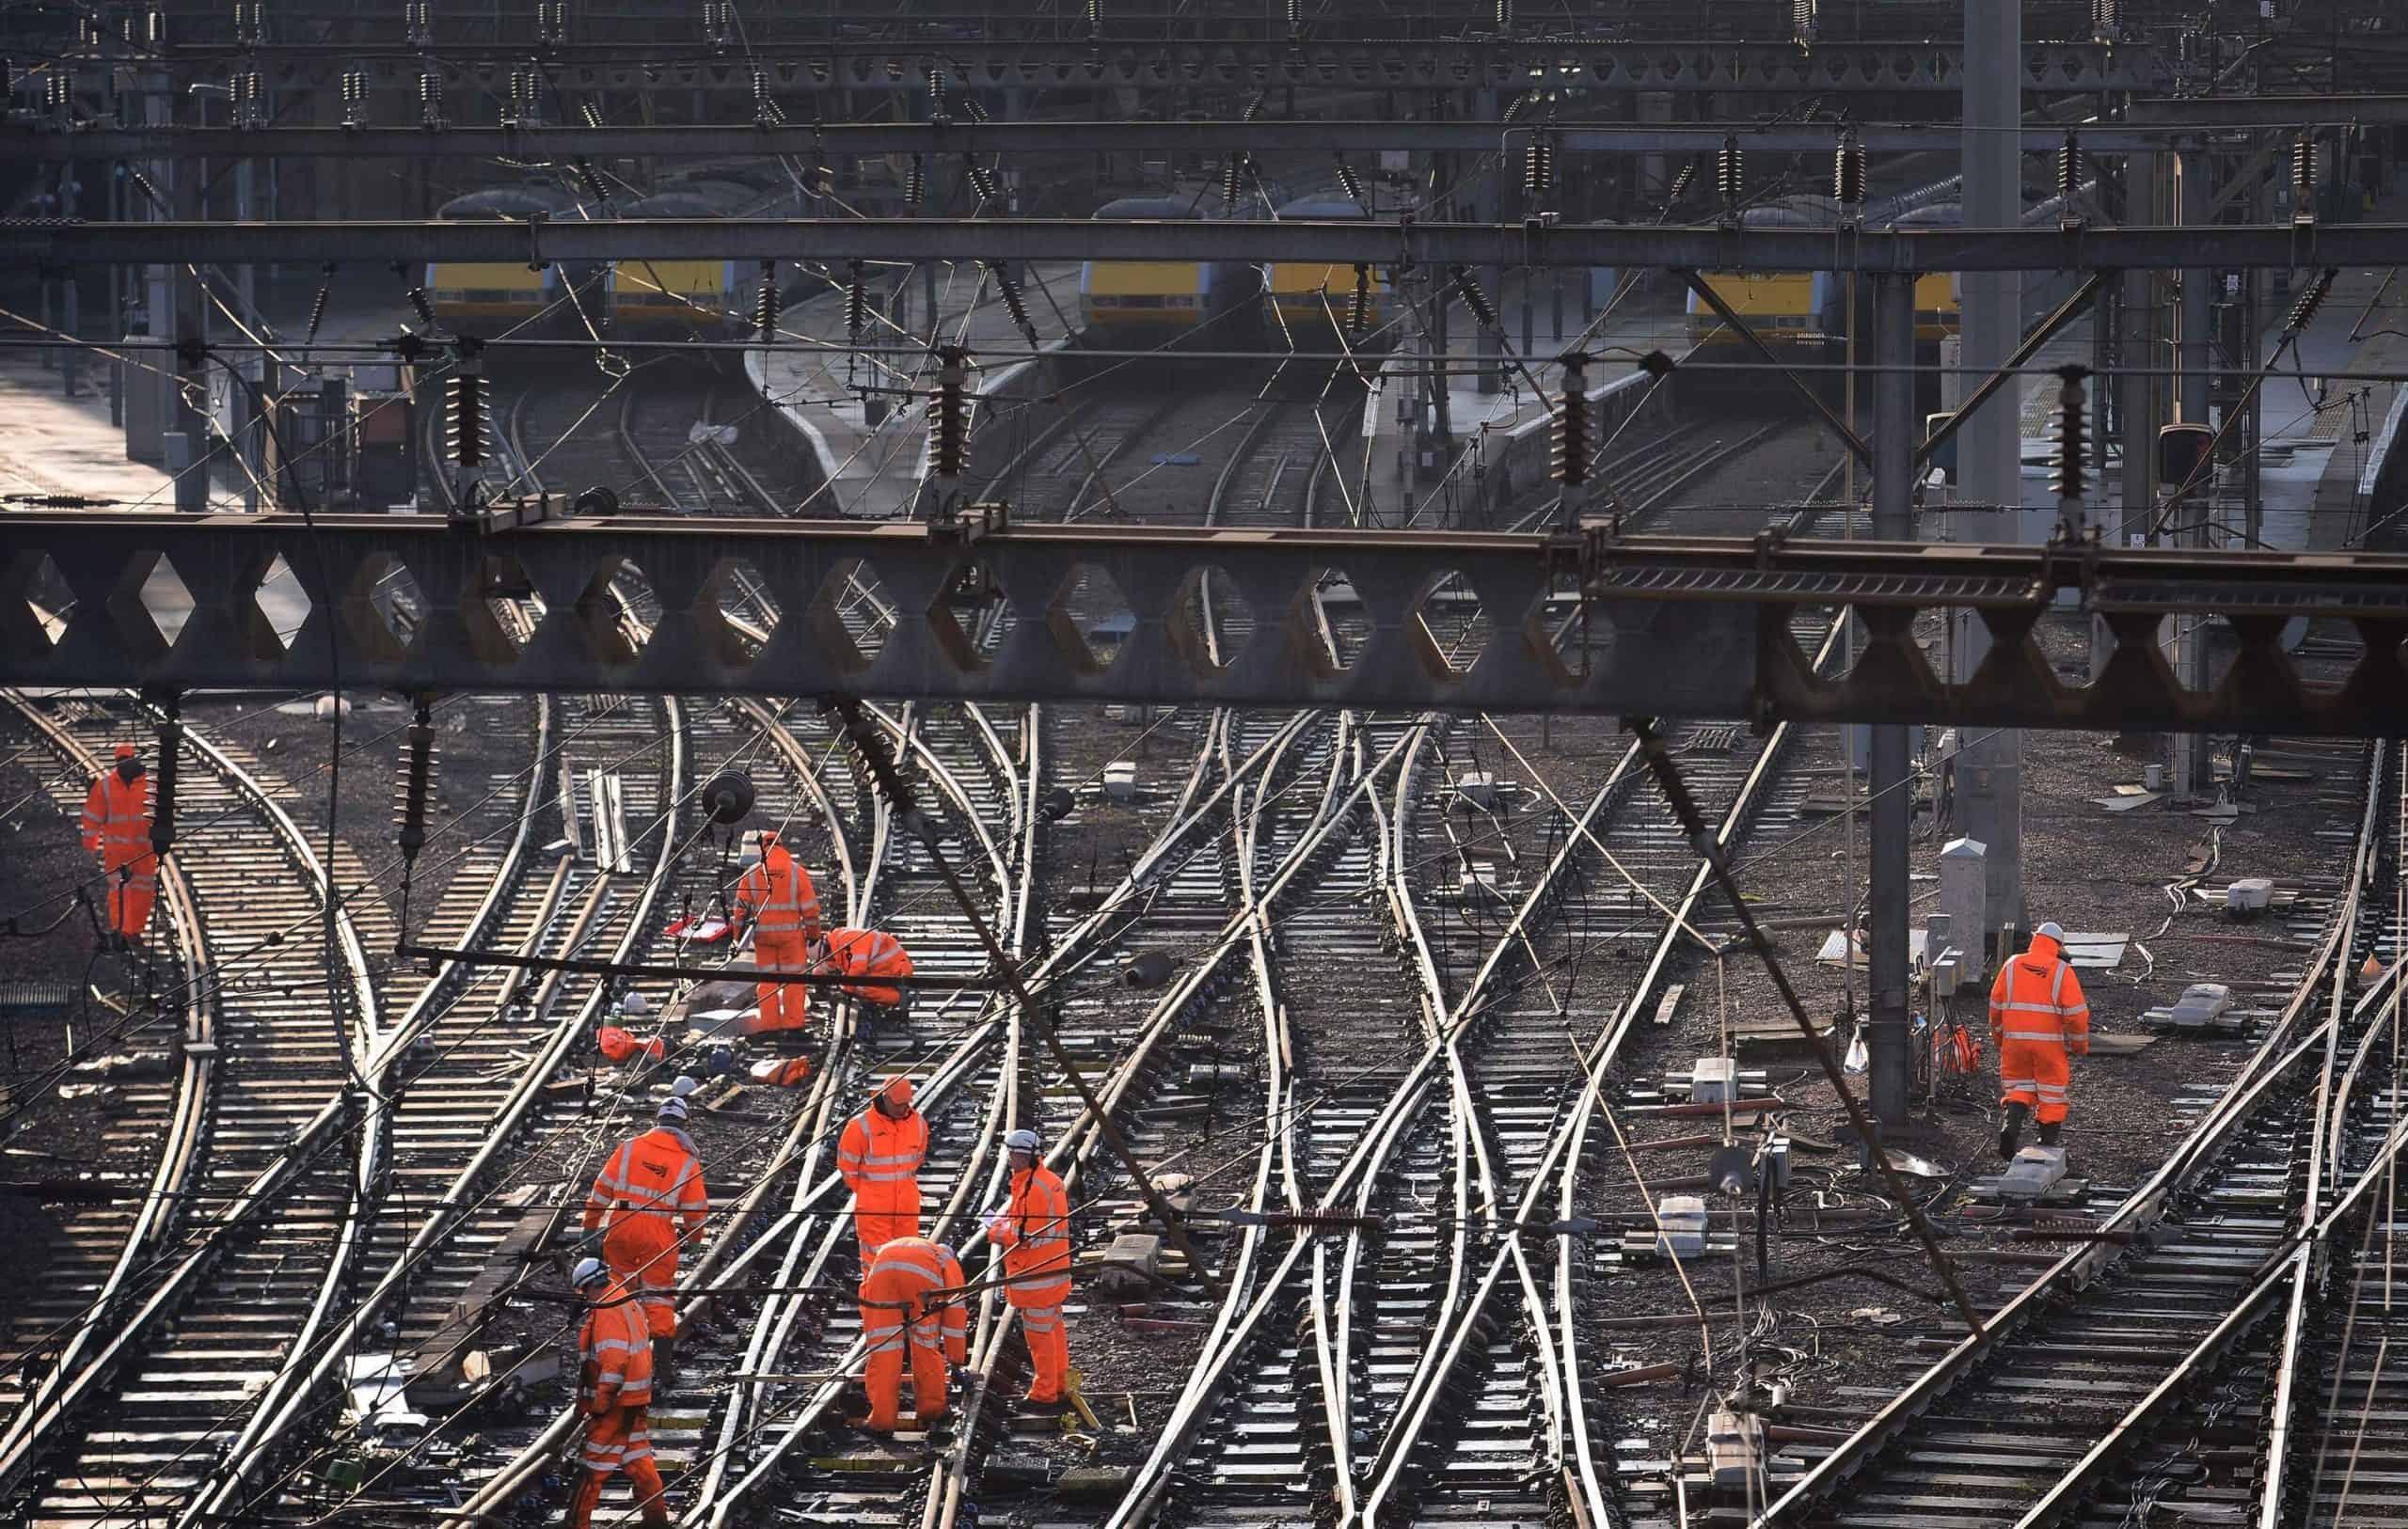 Anyone surprised? Britain’s railways not engineered to cope with heatwave